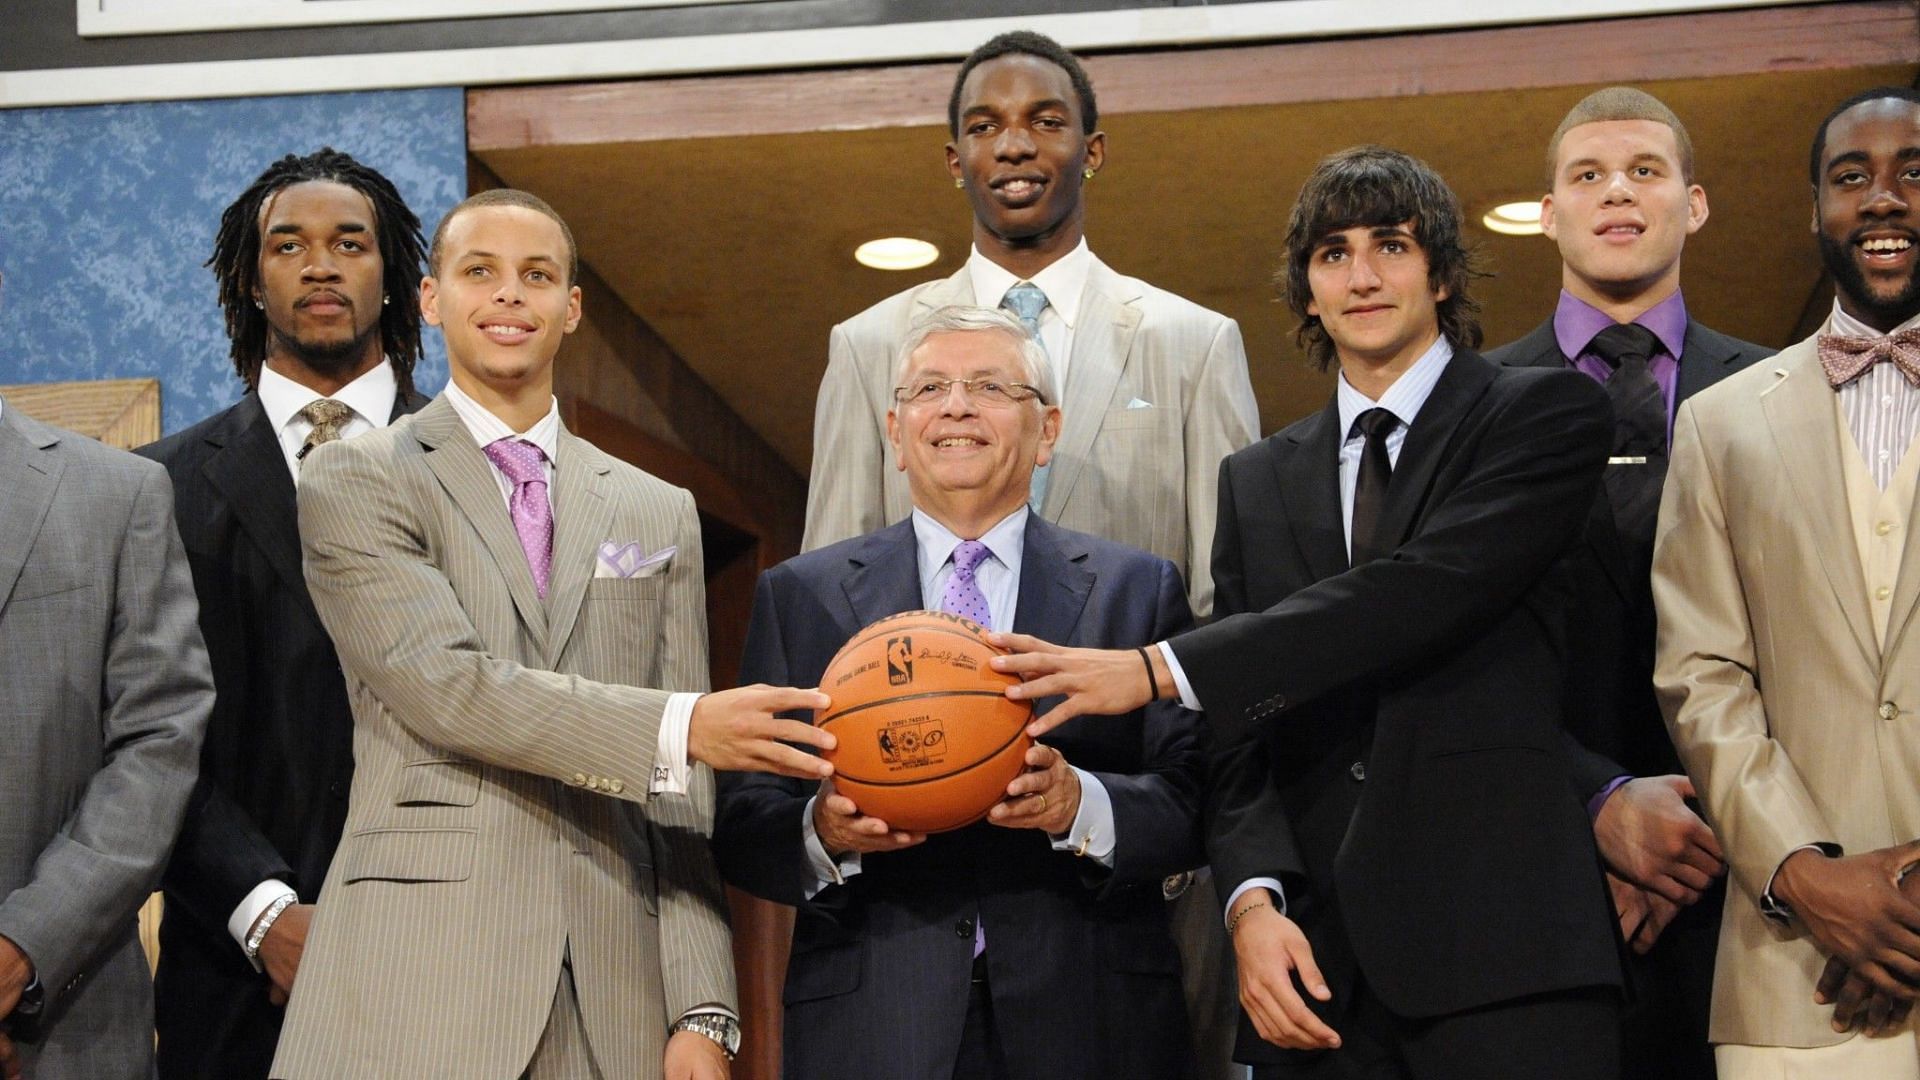 Steph Curry and the rest of 2009 NBA draft class